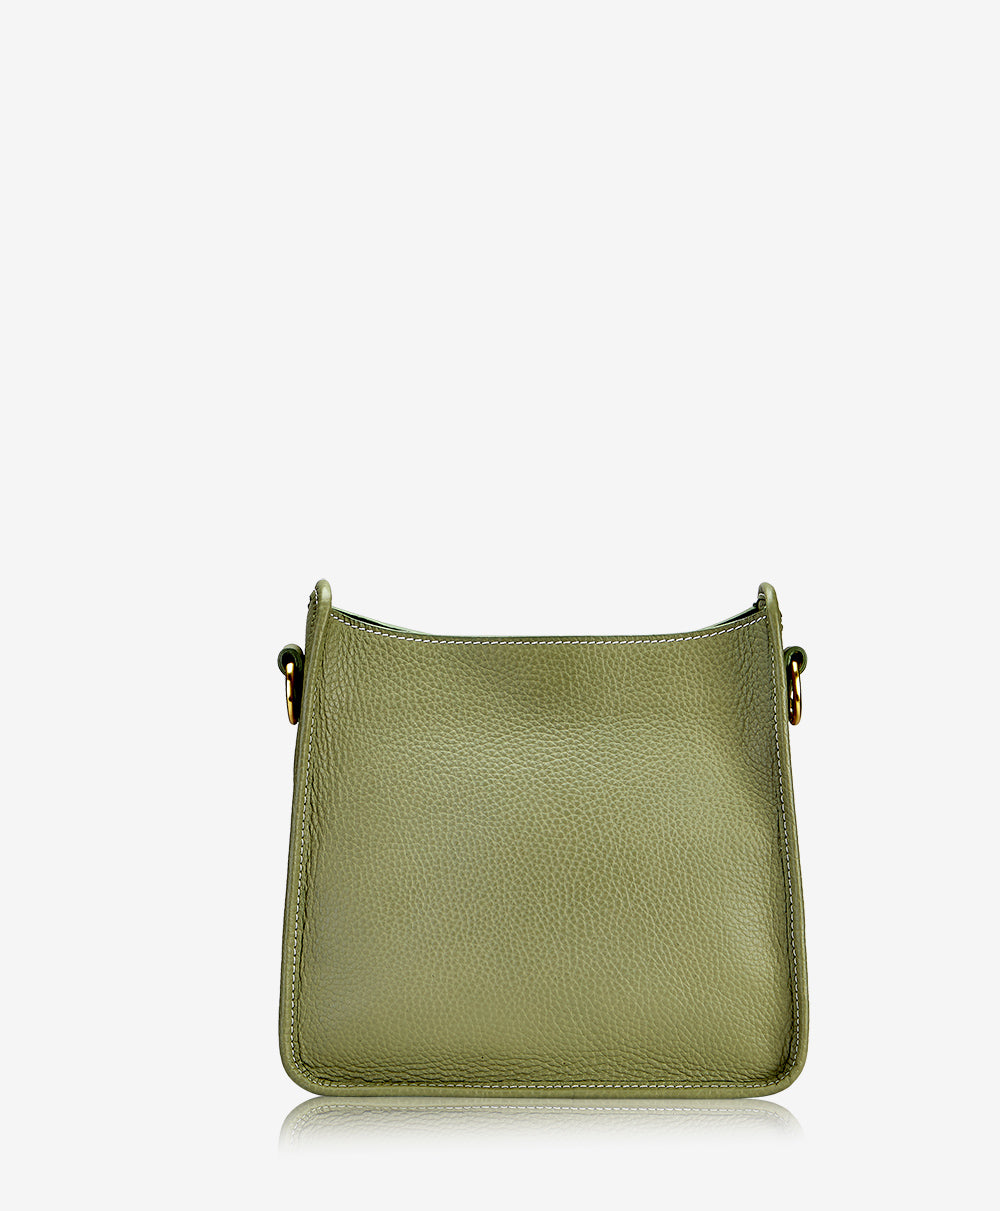 Check Coin Case with Strap in Olive Green - Women